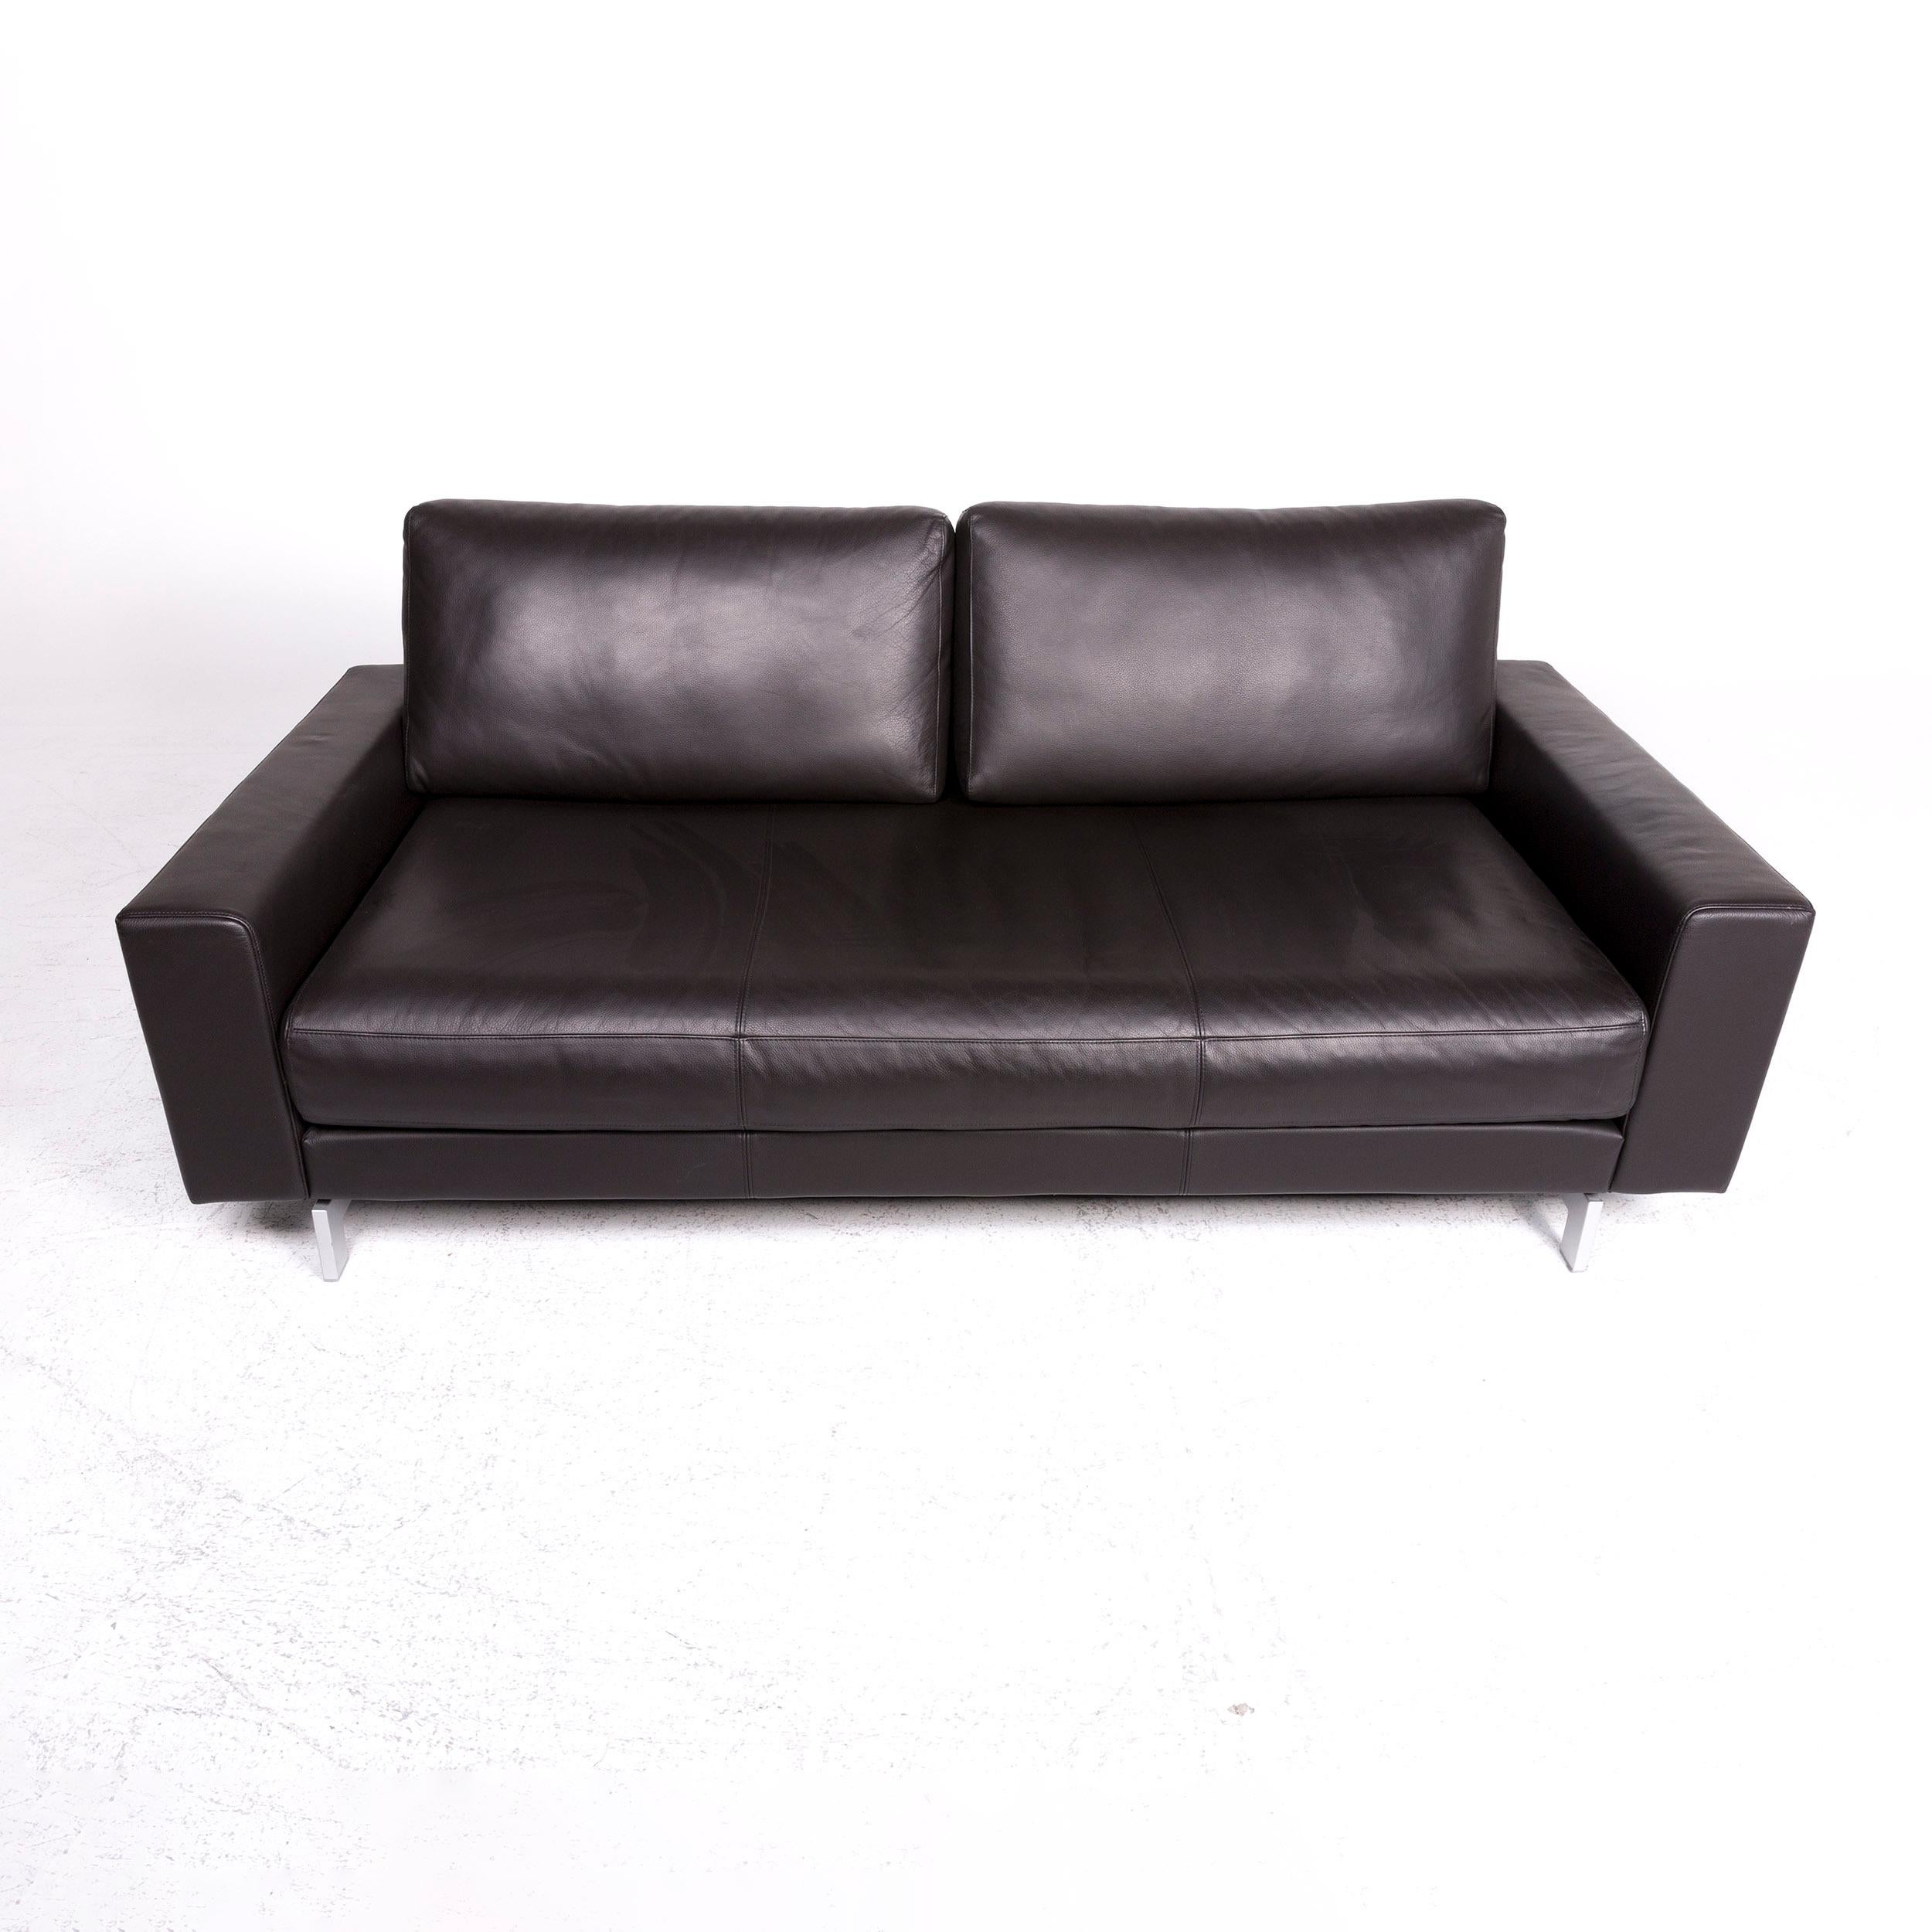 Contemporary Rolf Benz Vida Designer Leather Sofa Brown Two-Seat Couch